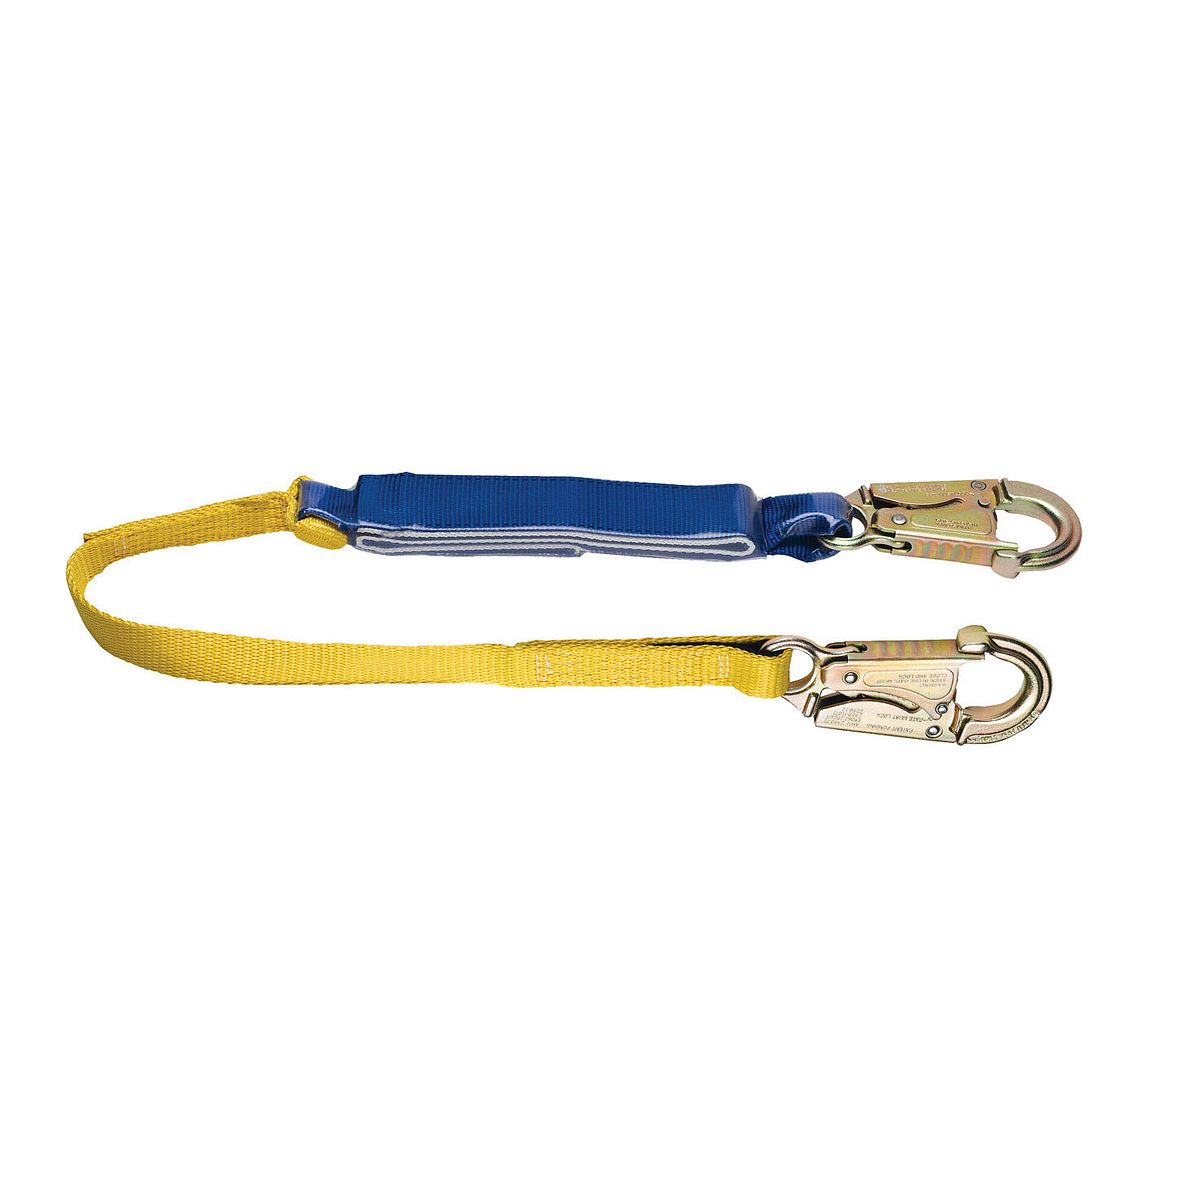 Werner 3 Foot Decoil Single Leg Lanyard with Steel Snap Hooks from GME Supply